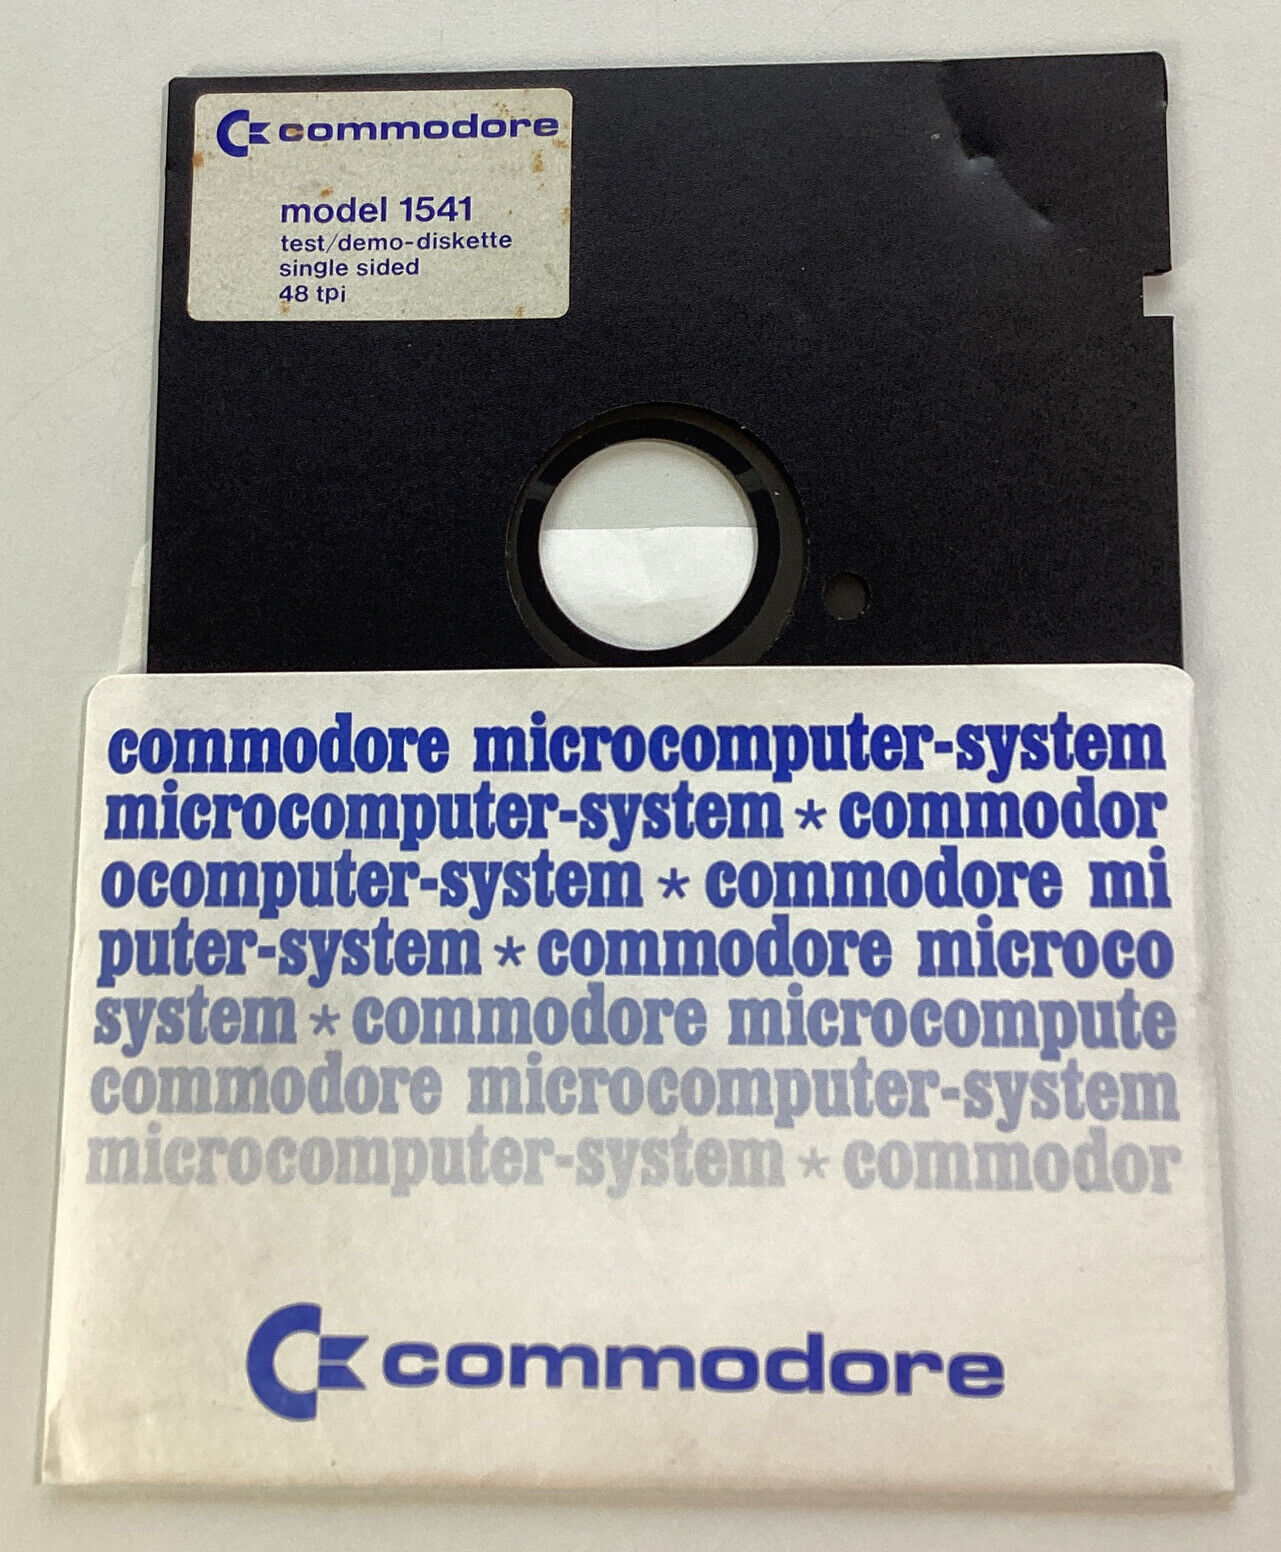 Commodore 64 Software Vintage 1980s Model 1541 Test Demo Rare 1 Floppy Disk